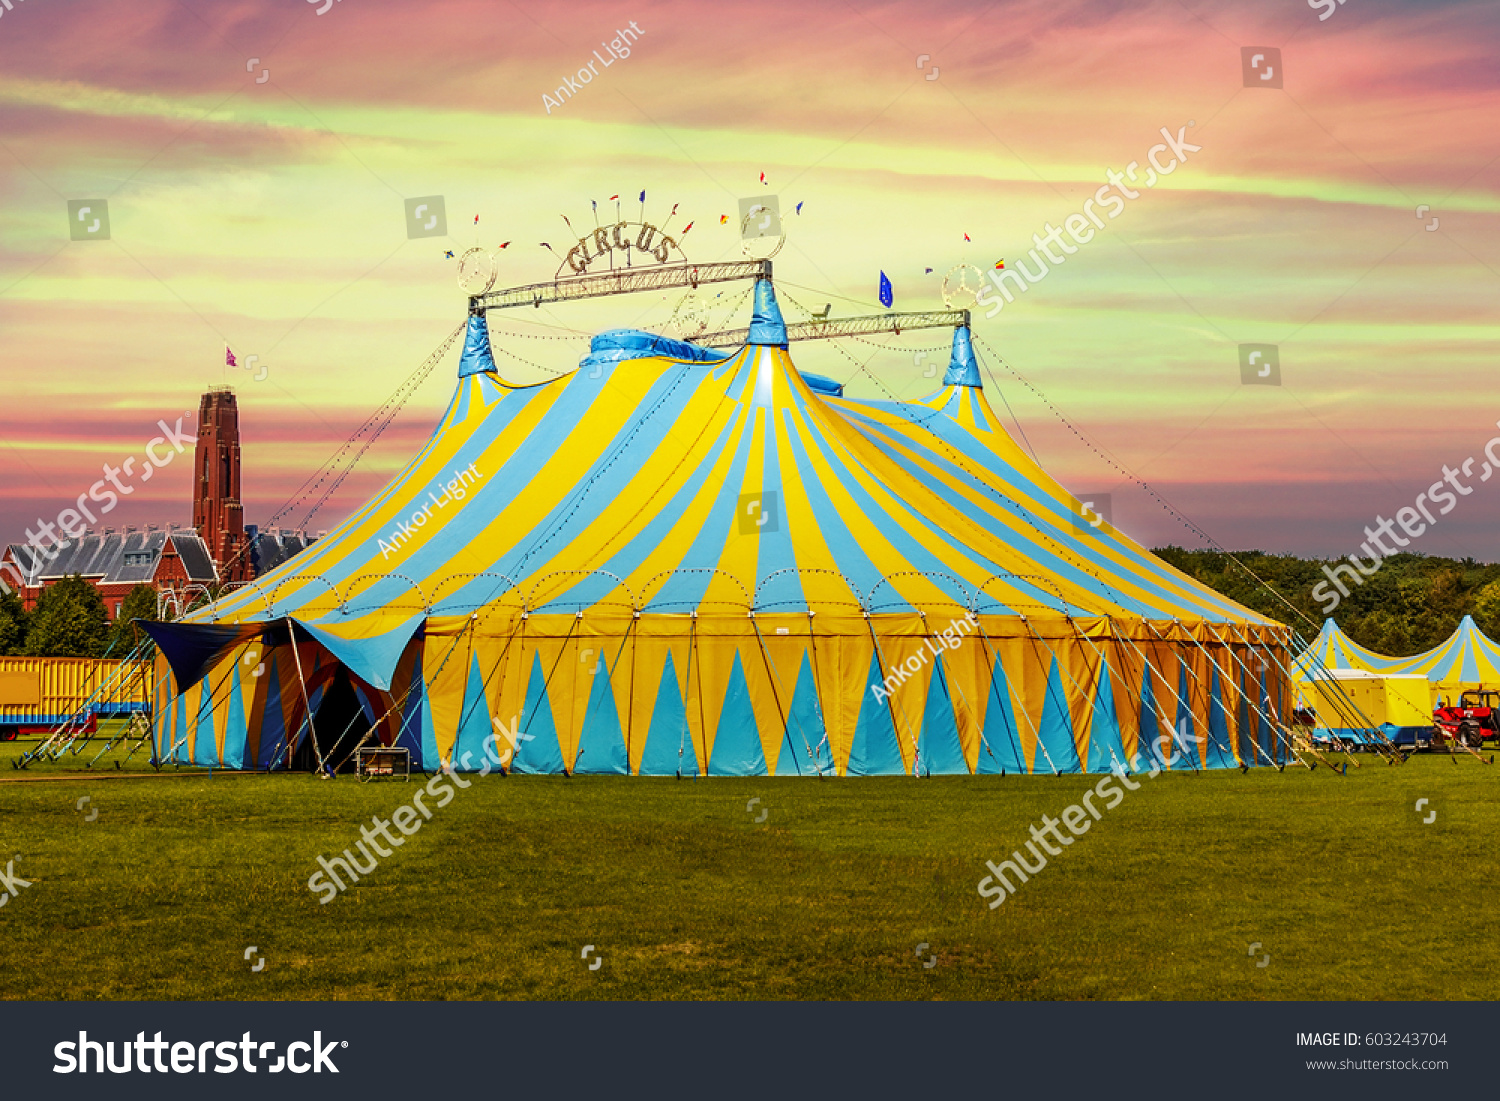 Circus tent under a warn sunset and chaotic sky without the name of the circus company which is cloned out and replaced by the metallic structure #603243704